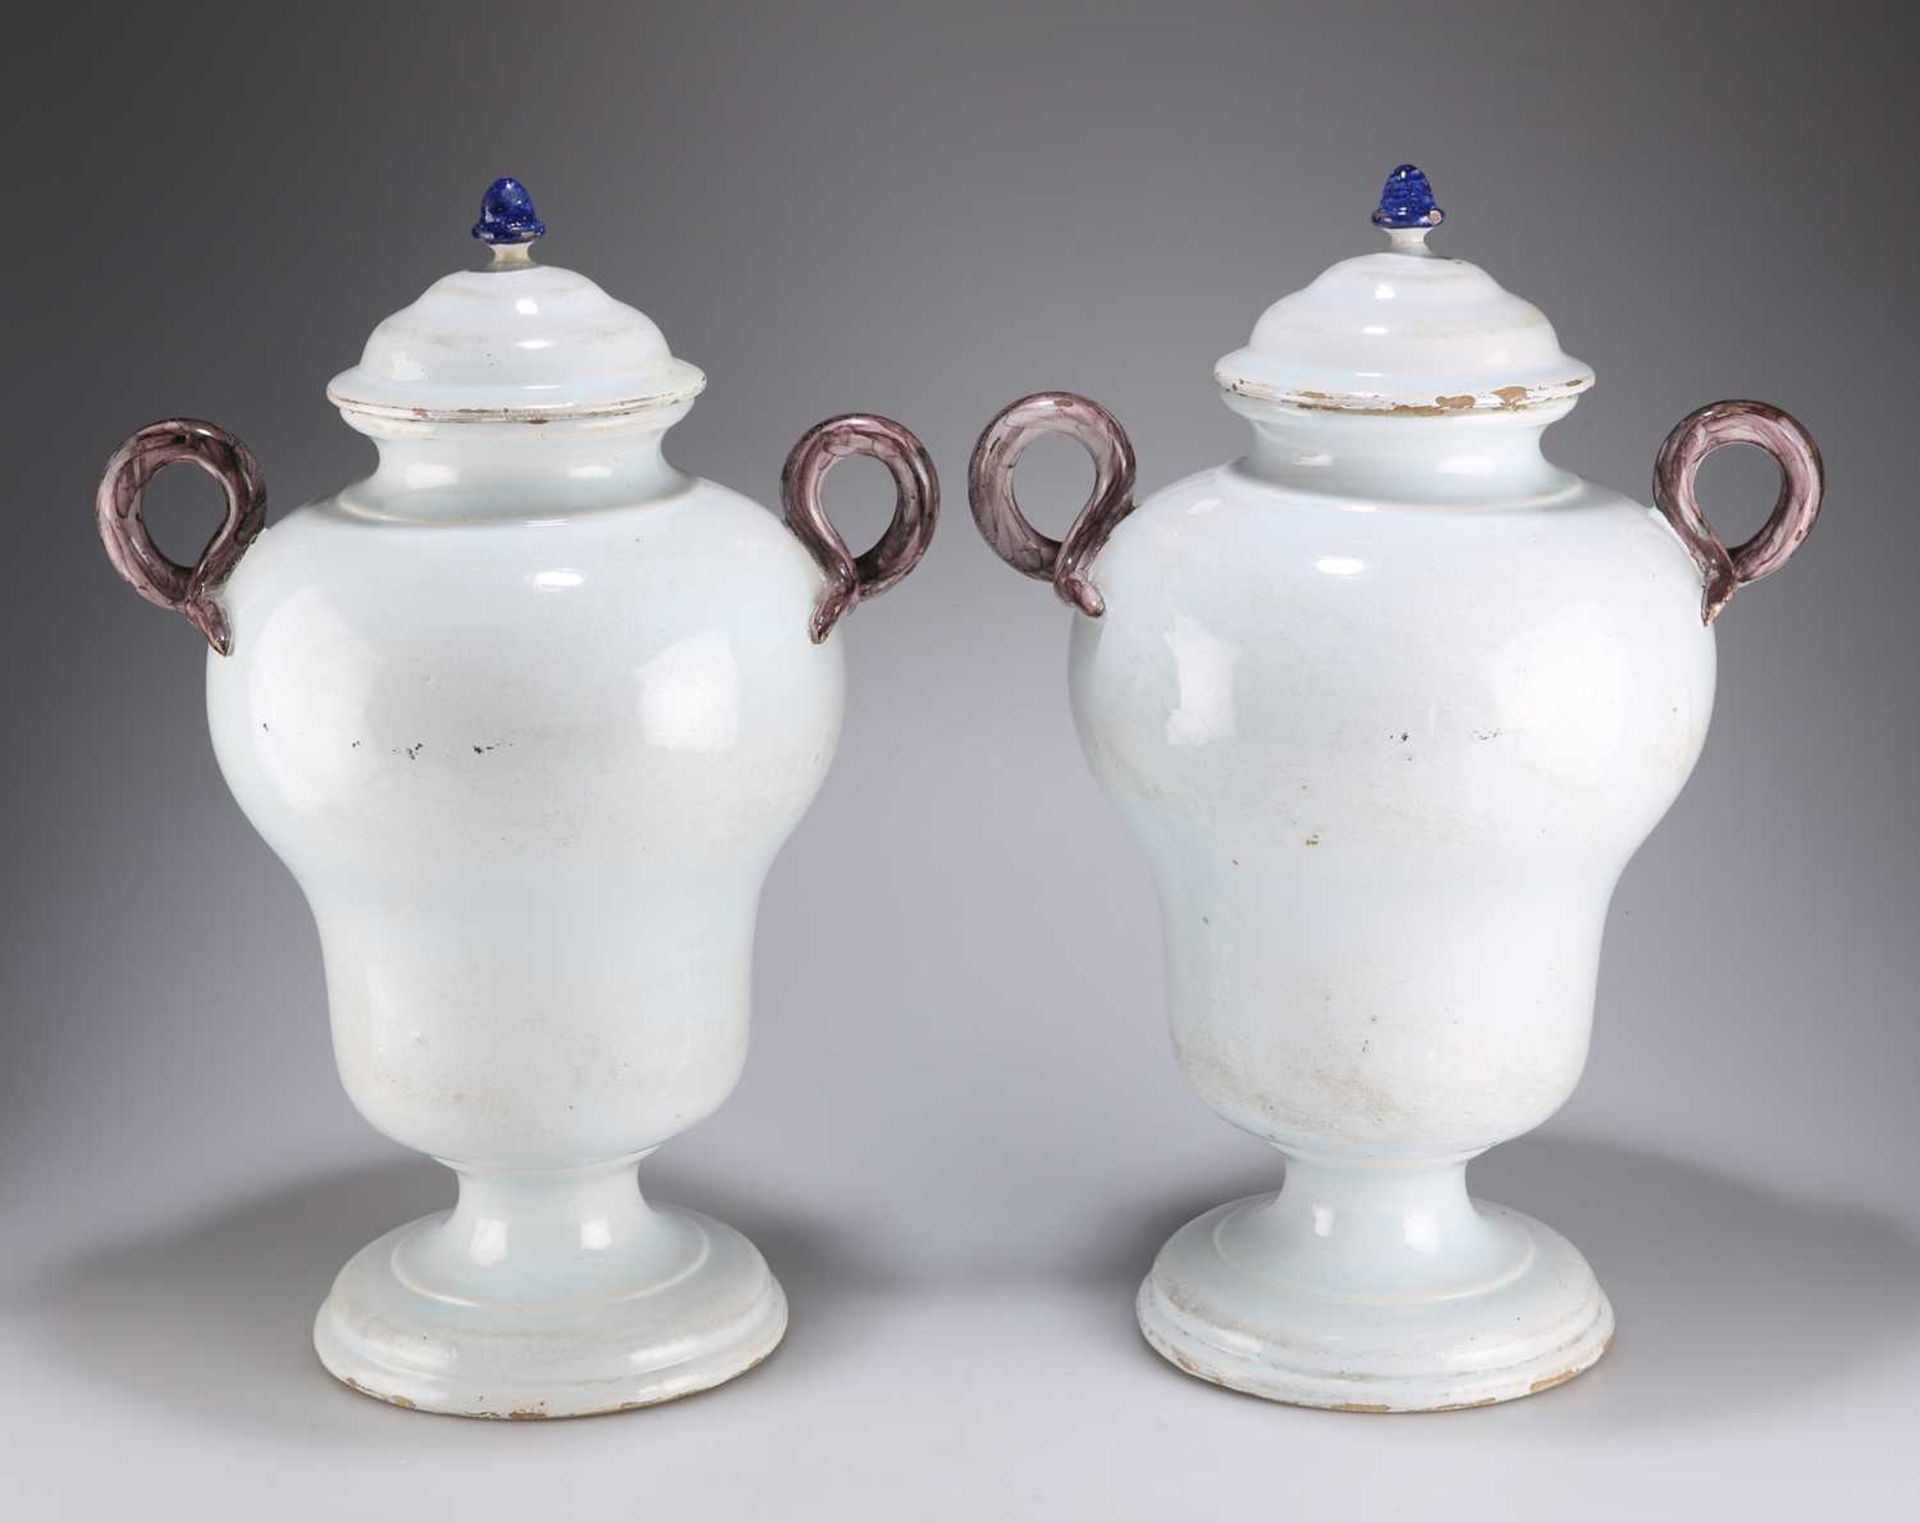 A PAIR OF 19TH CENTURY POLYCHROME DUTCH DELFT PHARMACY JARS AND COVERS - Image 2 of 2